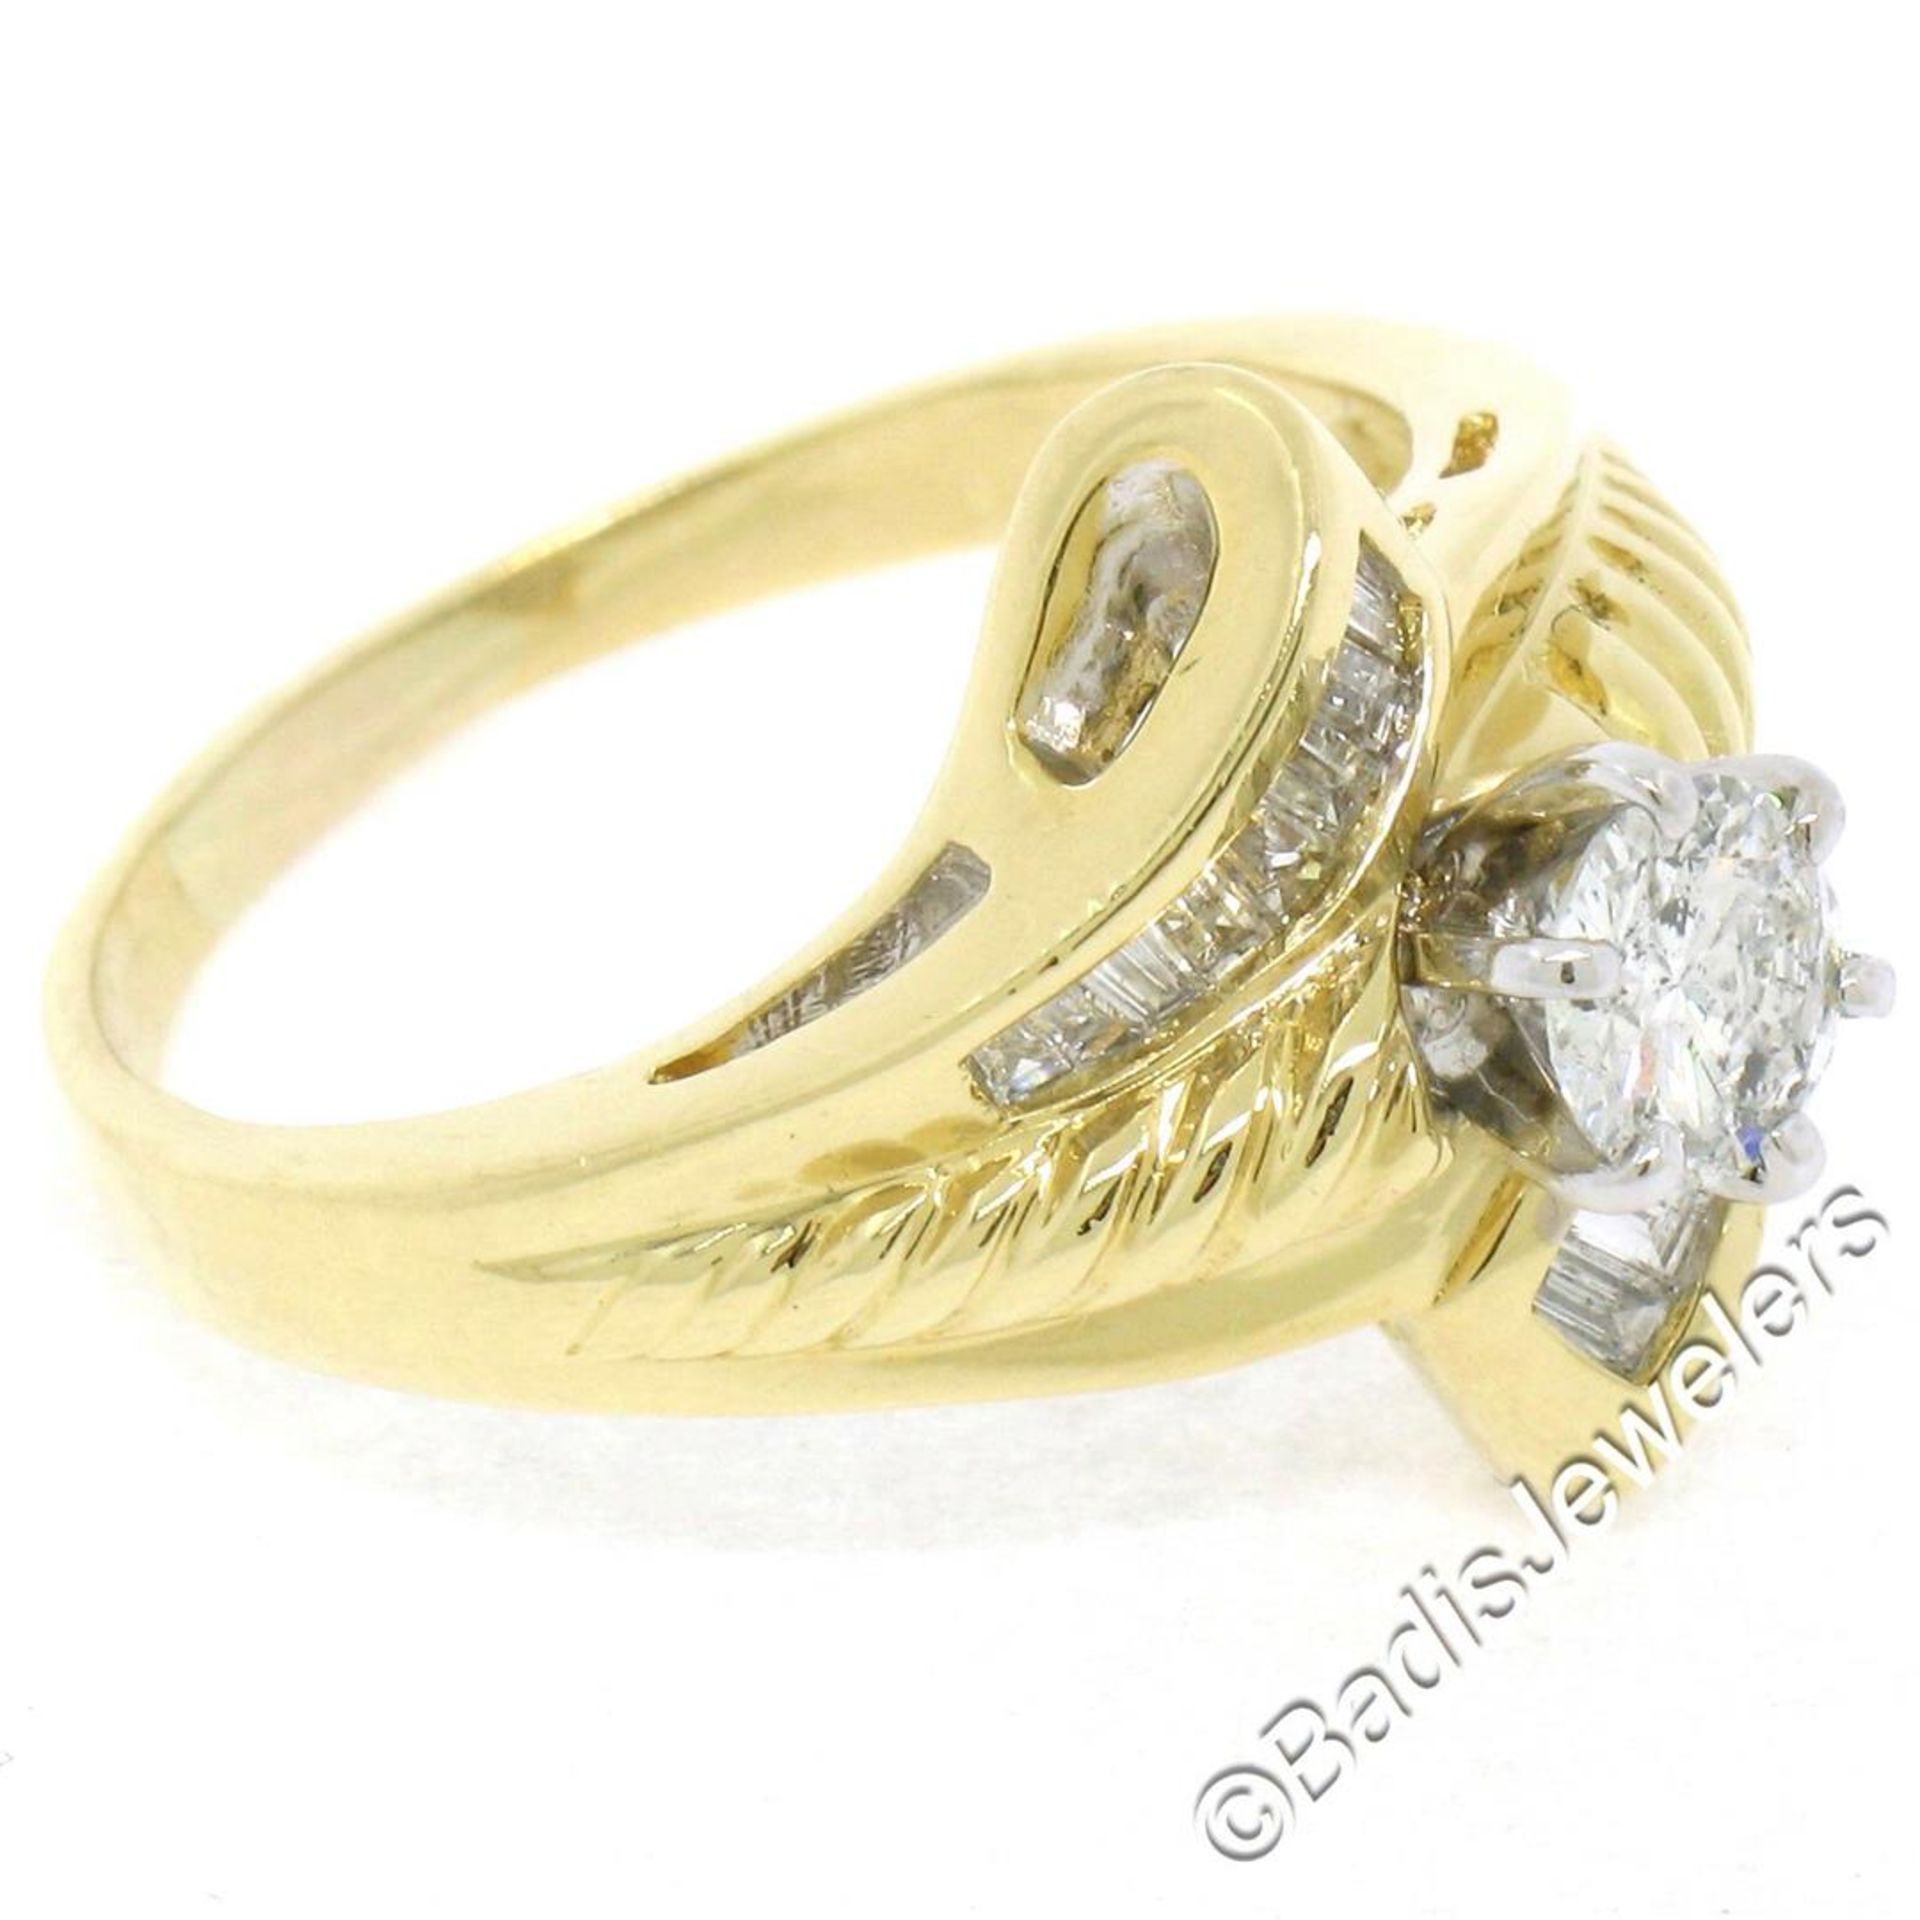 18kt Yellow and White Gold 0.90 ctw Round and Baguette Diamond Ring - Image 6 of 8